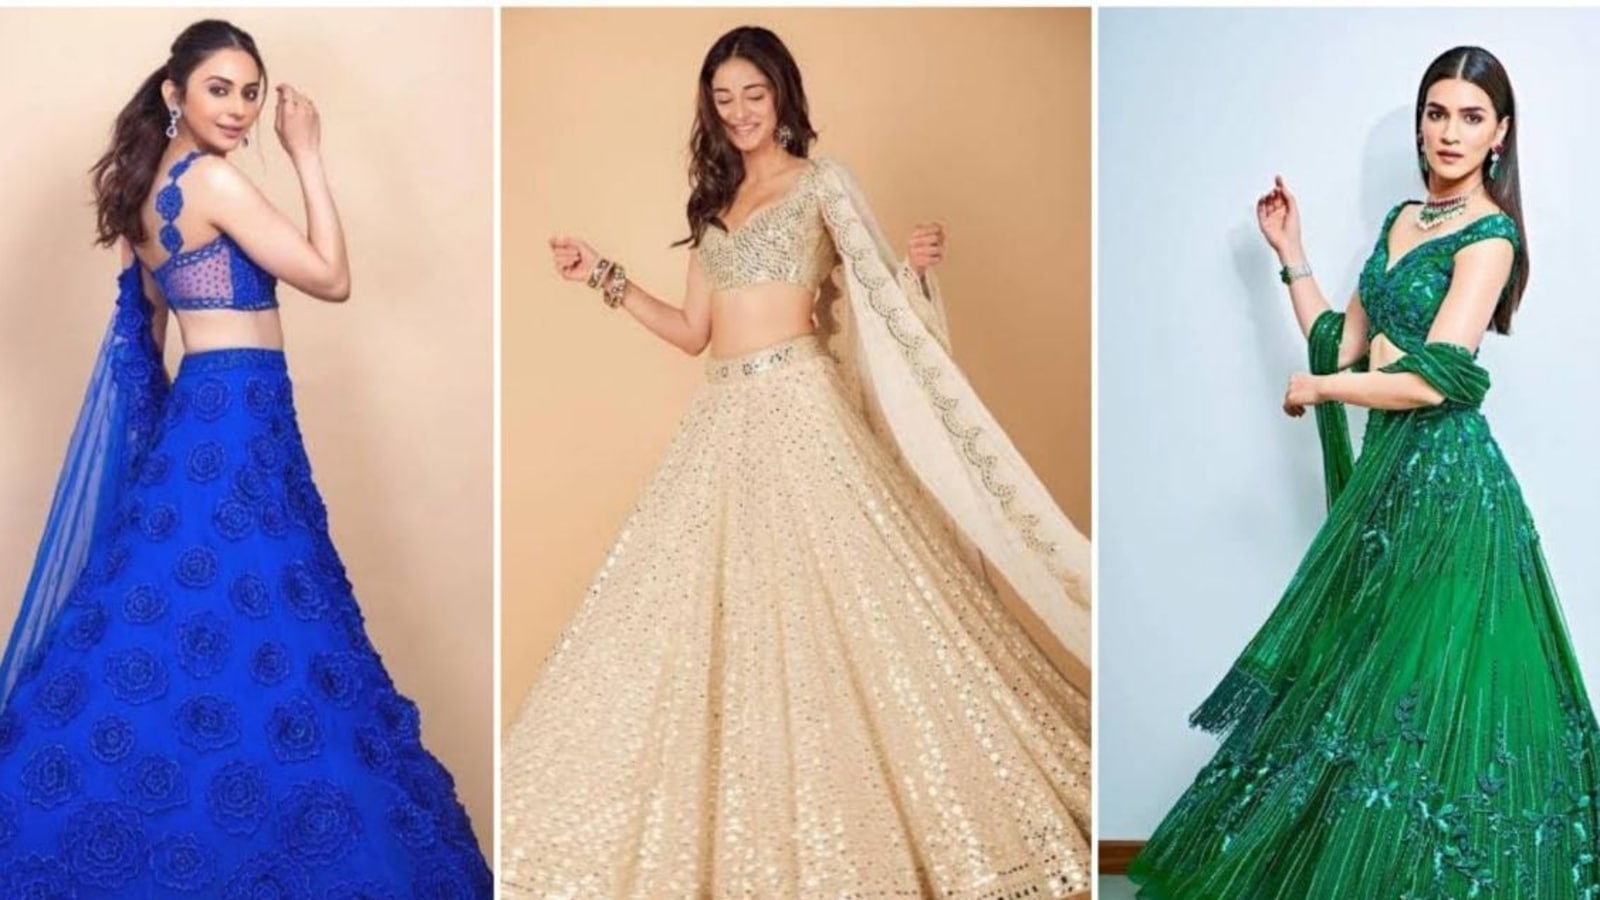 Navratri 2022 9 celebinspired outfits for each day of the festival